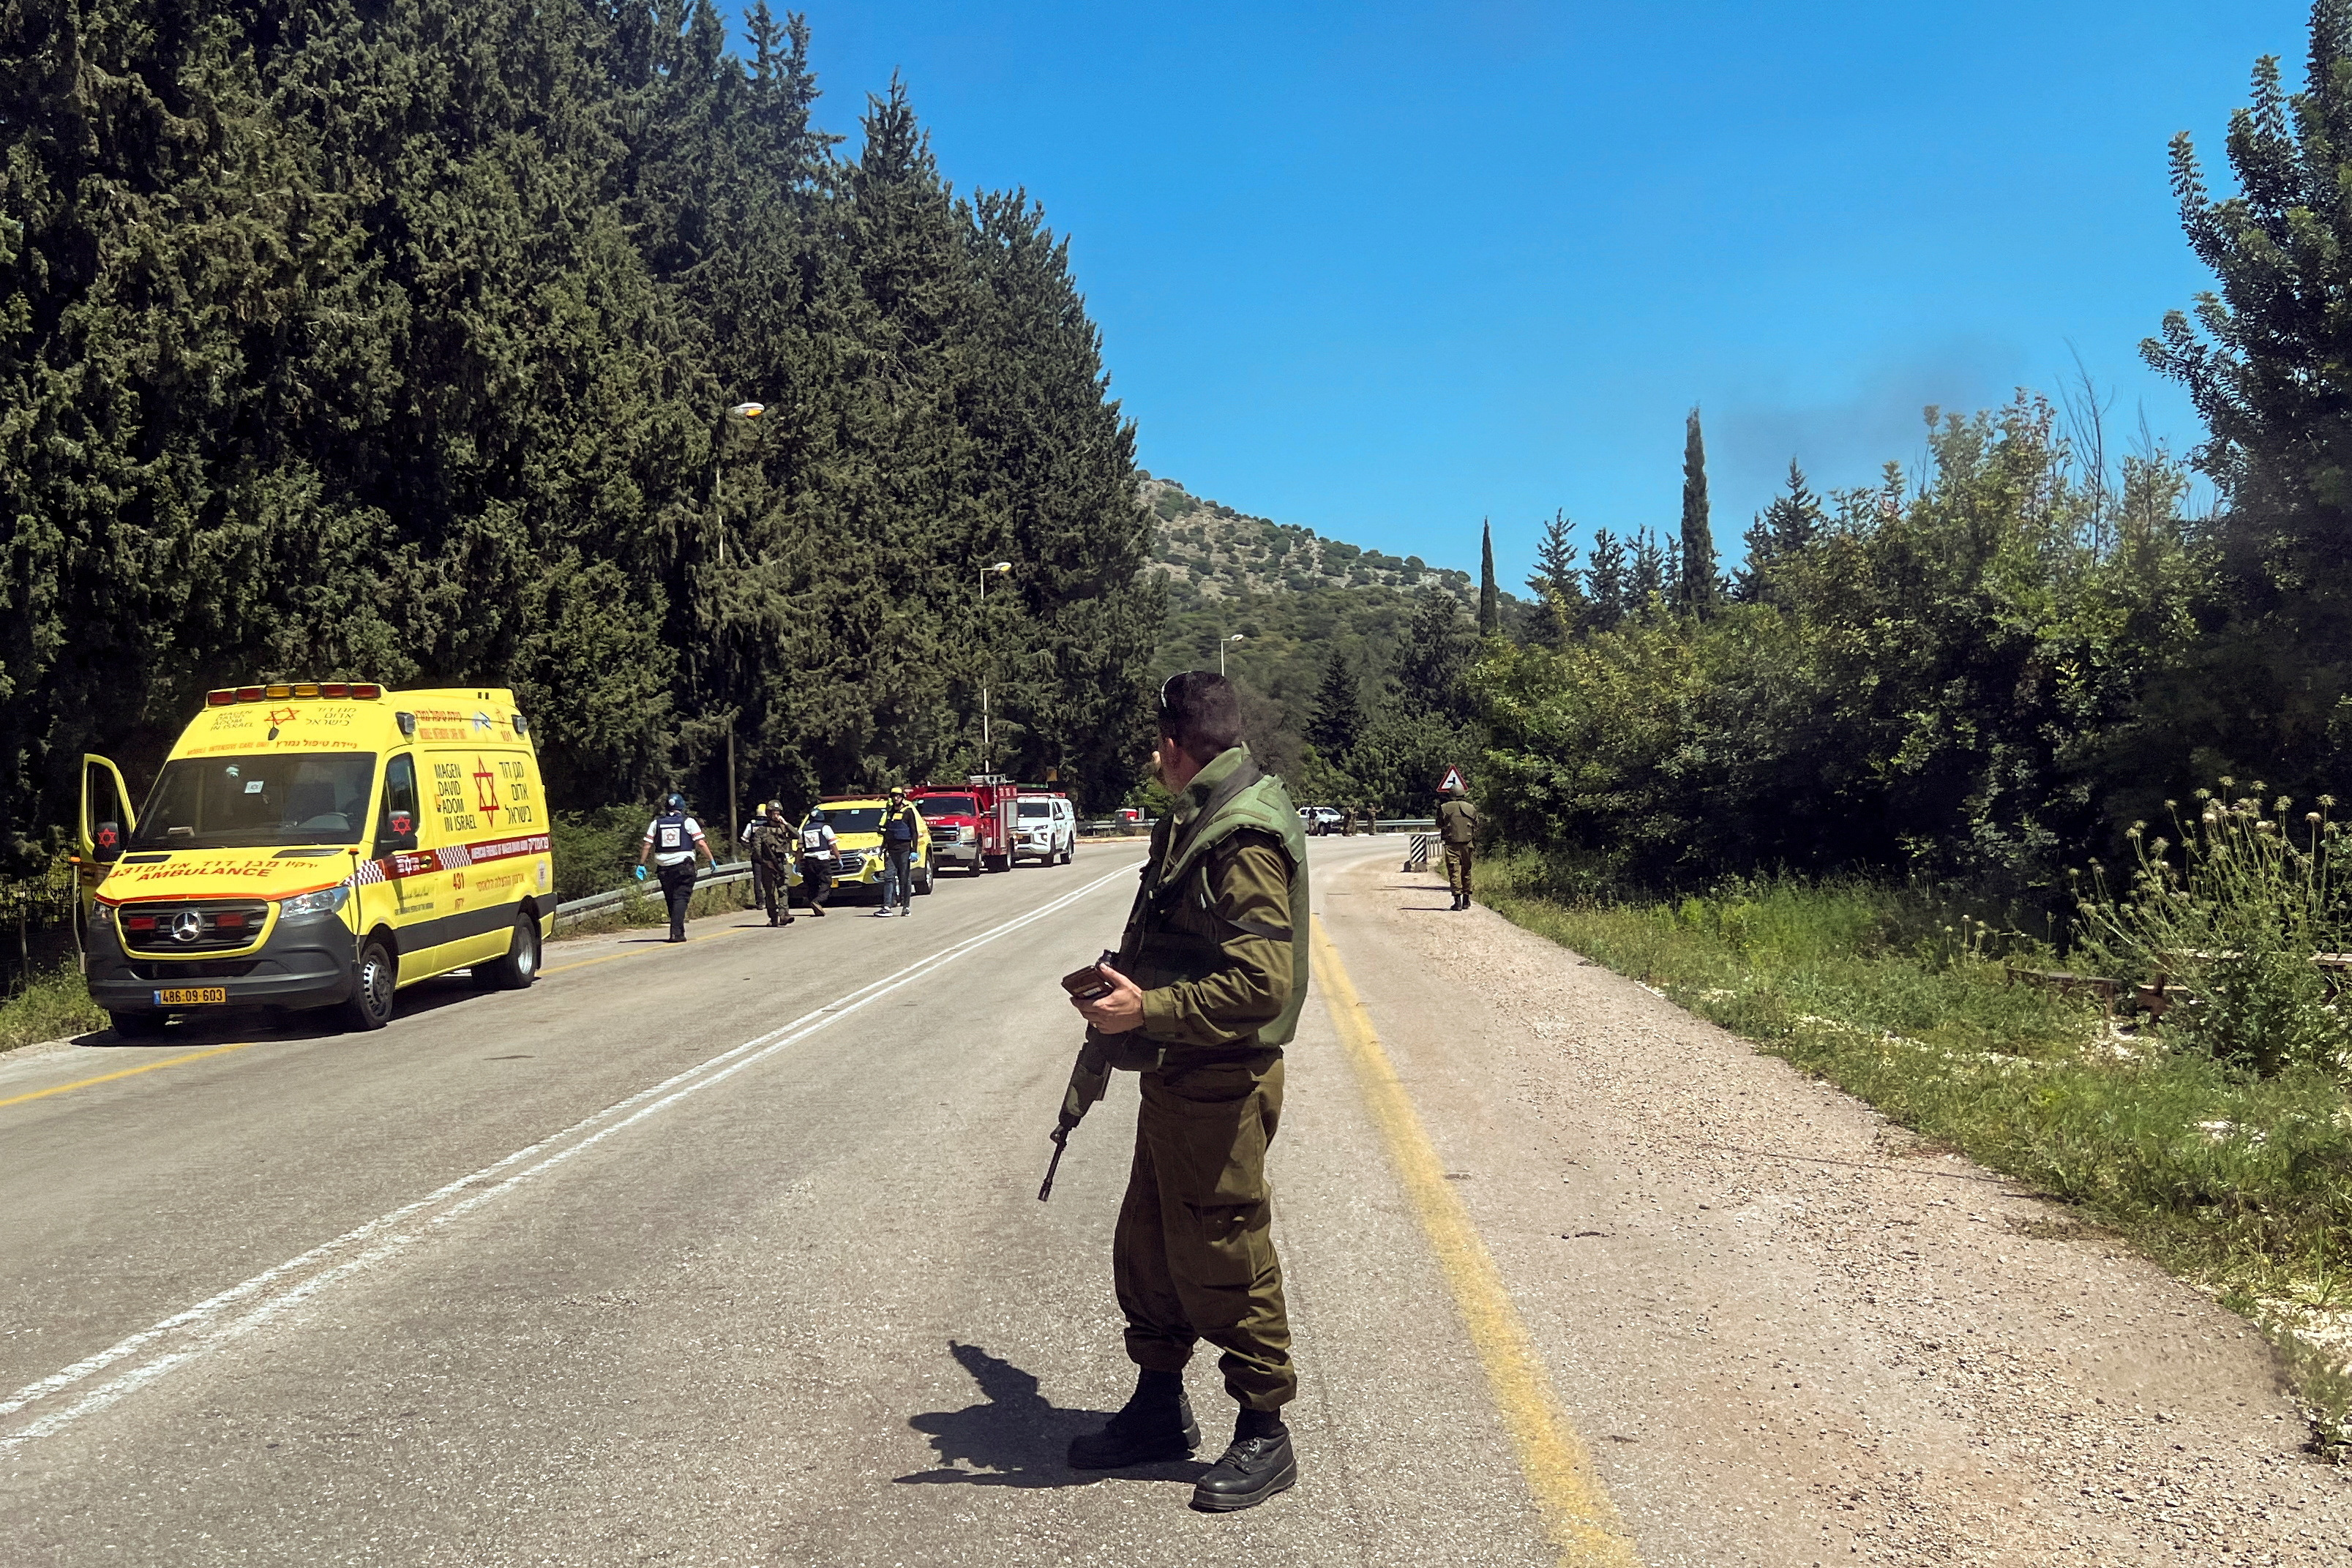 An Israeli soldier looks on after it was reported that people were injured, amid ongoing cross-border hostilities between Hezbollah and Israeli forces, near Arab al-Aramashe